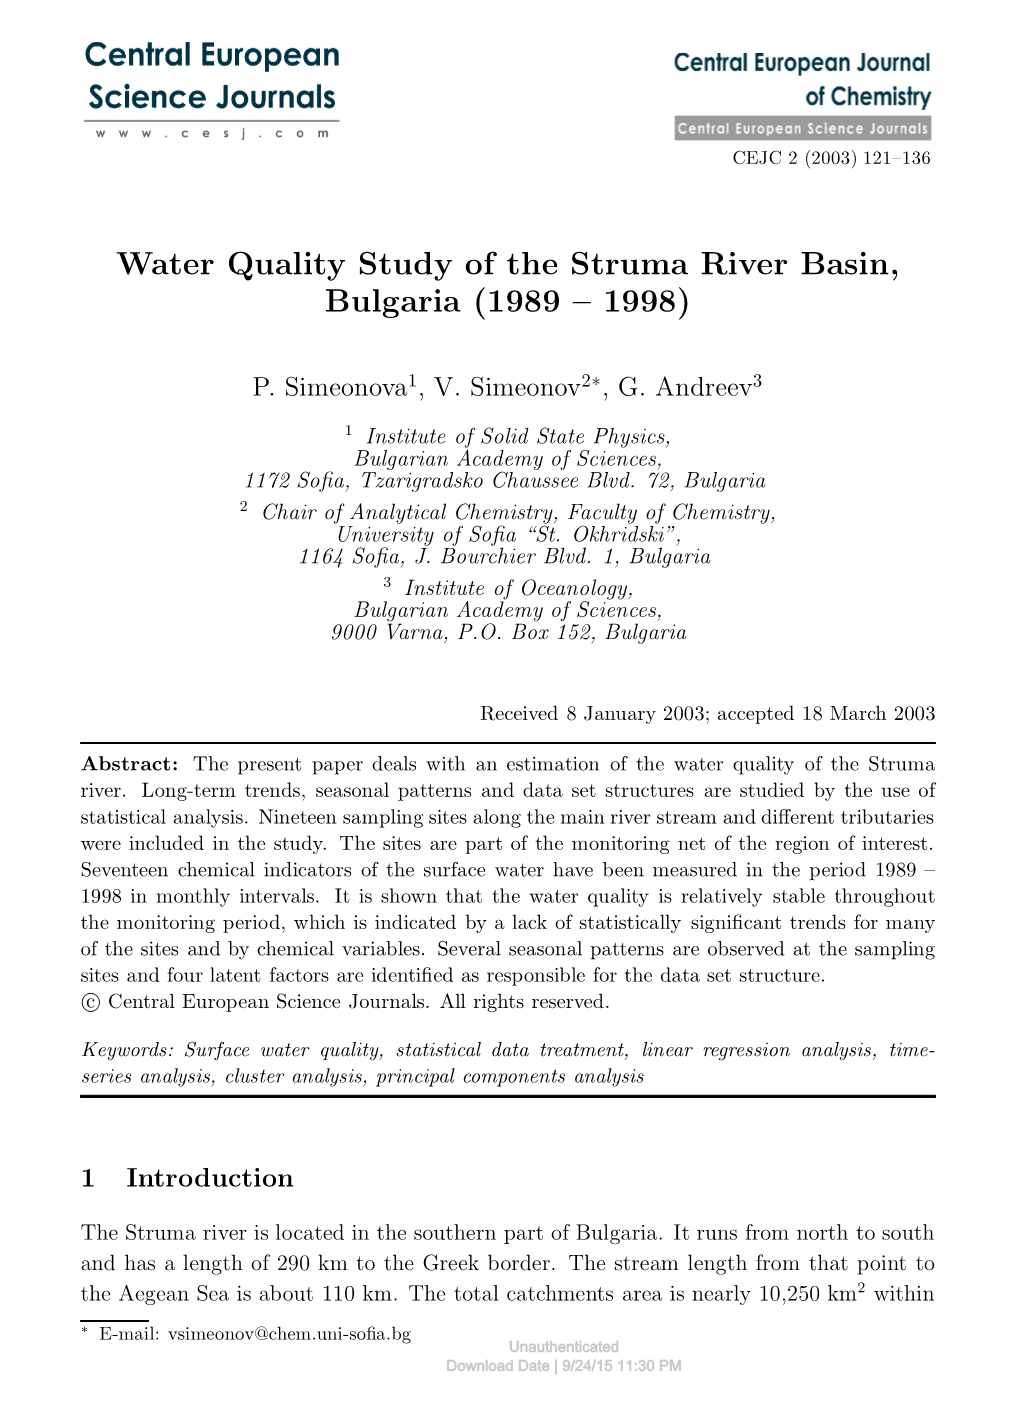 Water Quality Study of the Struma River Basin